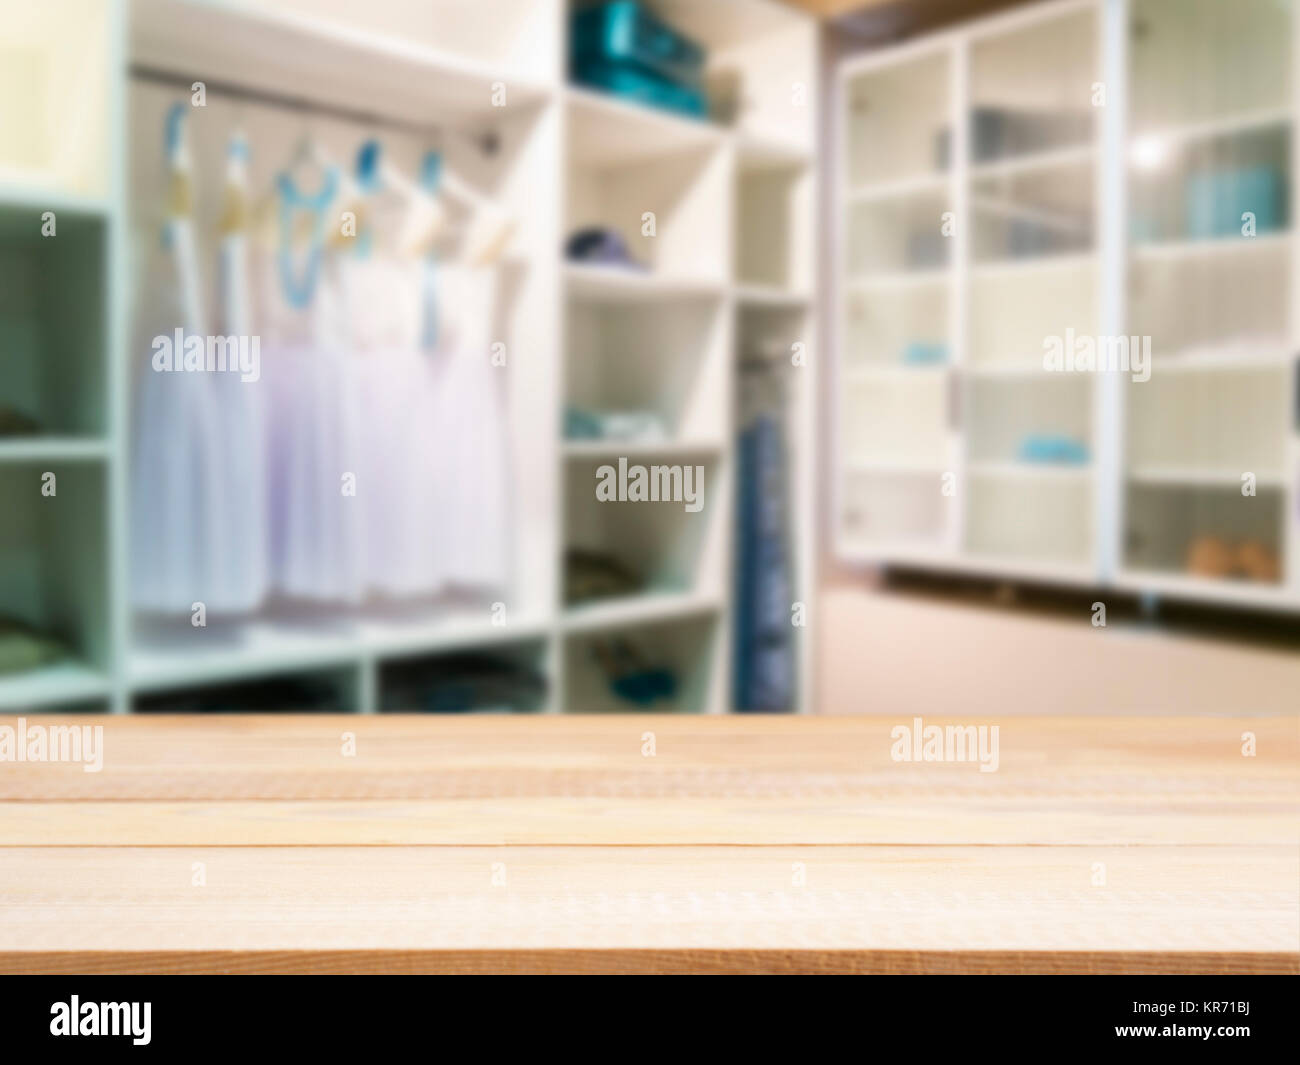 Wooden empty table in front of blurred closet room Stock Photo